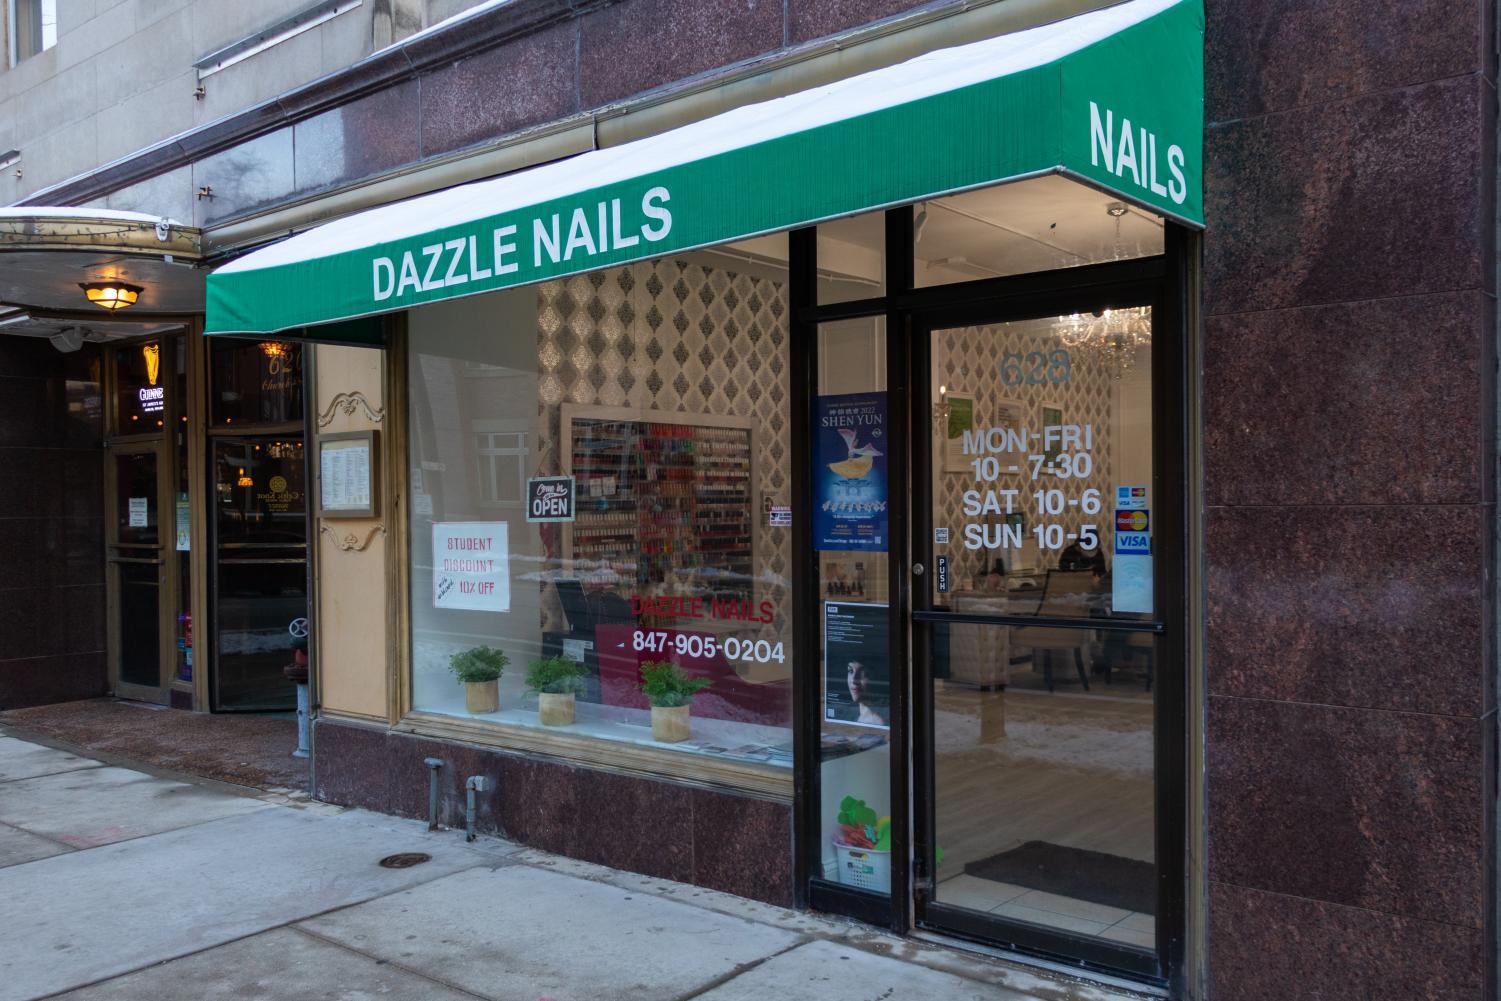 The+exterior+of+Dazzle+Nails+with+a+green+awning.+In+the+windows+there+is+a+%E2%80%9C10%25+student+discount%E2%80%9D+sign.